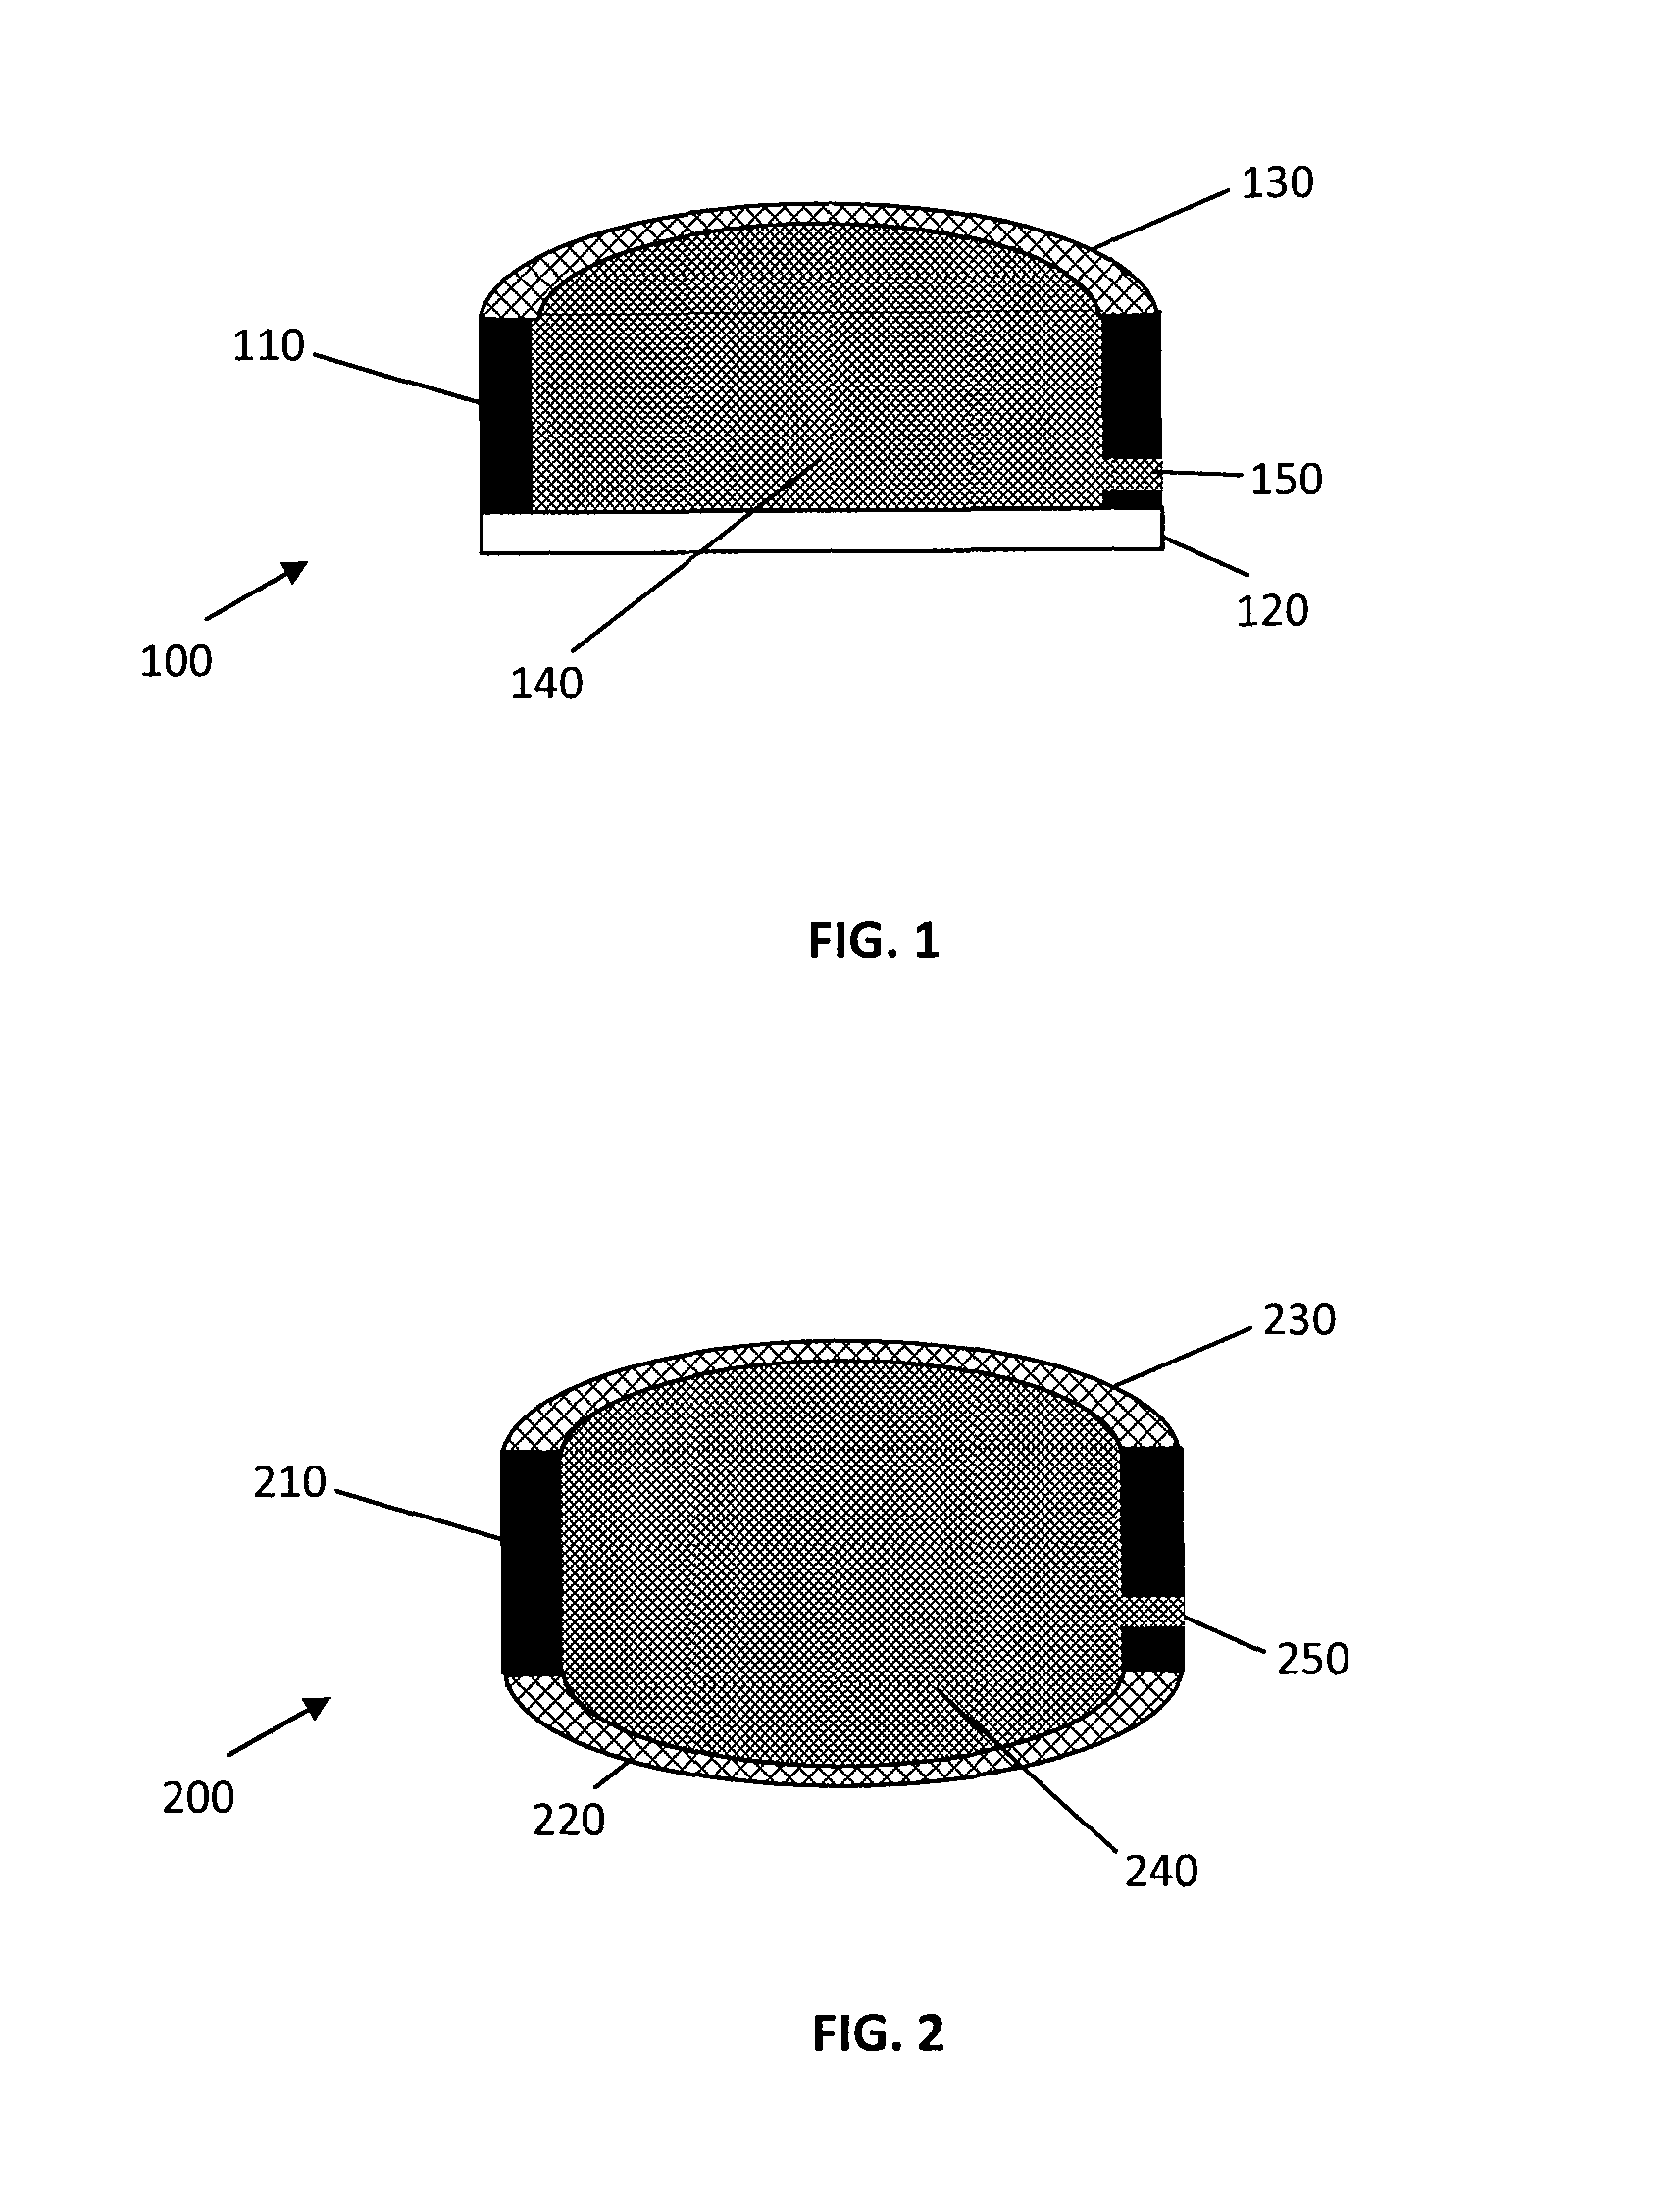 Fluidic adaptive lens with a lens membrane having suppressed fluid permeability